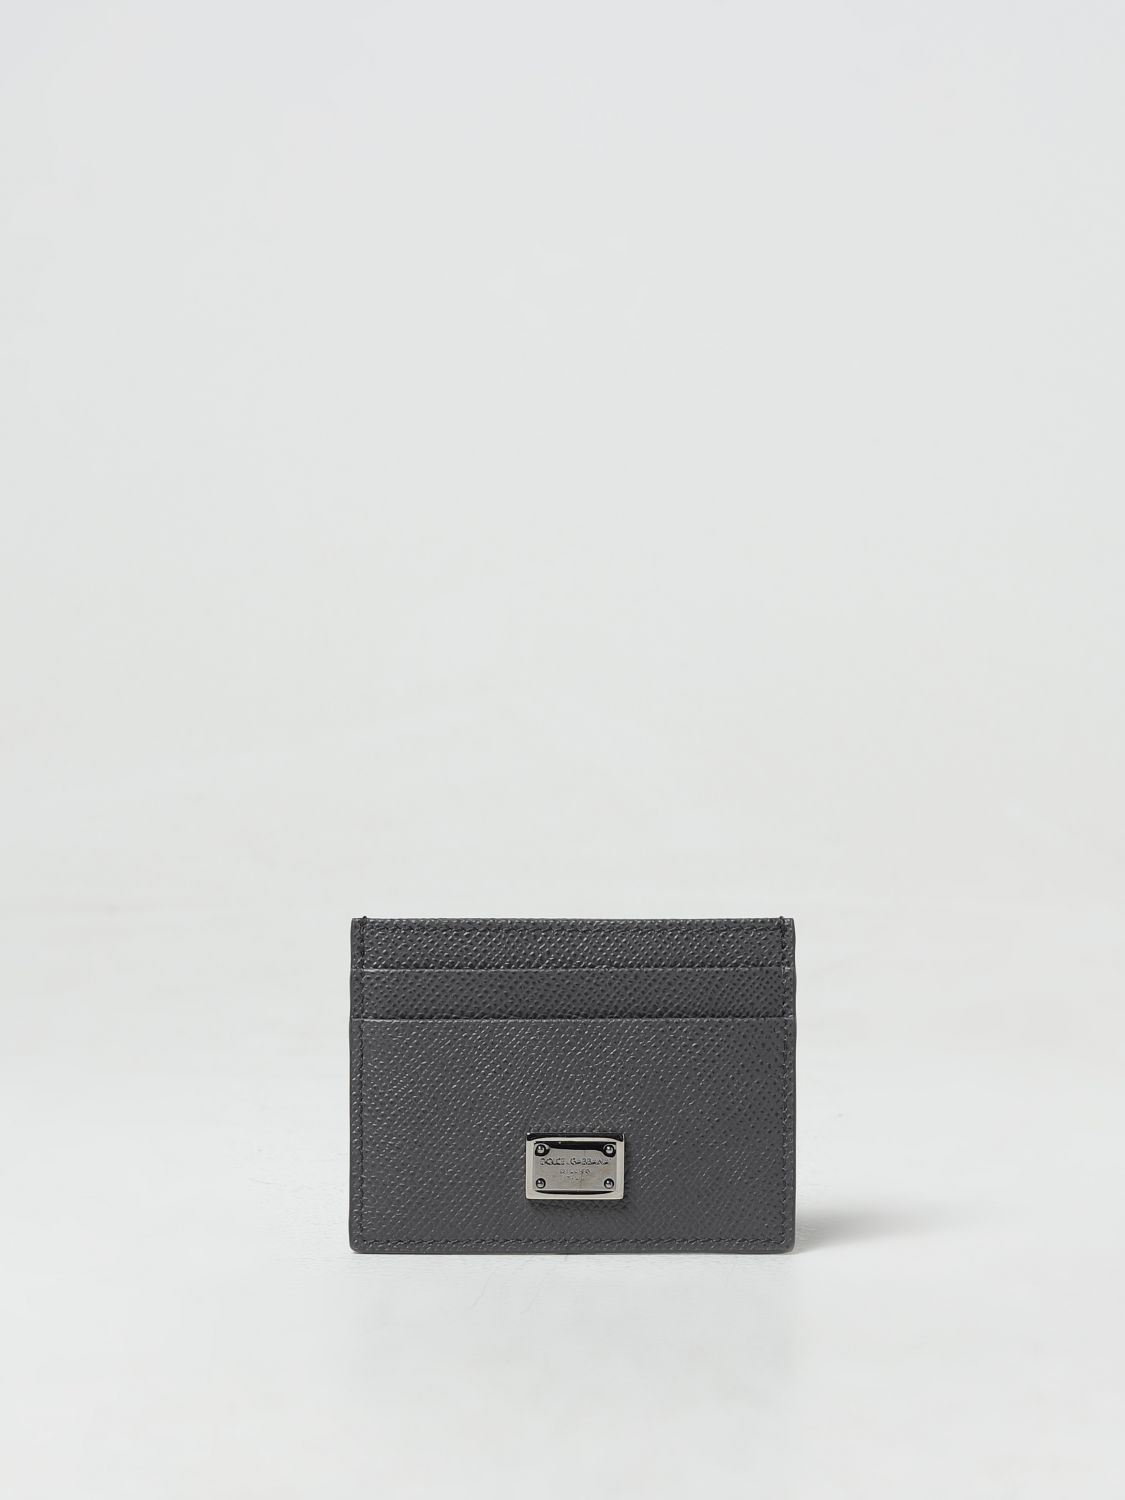 Dolce & Gabbana Credit Card Holder In Grained Leather In 炭黑色